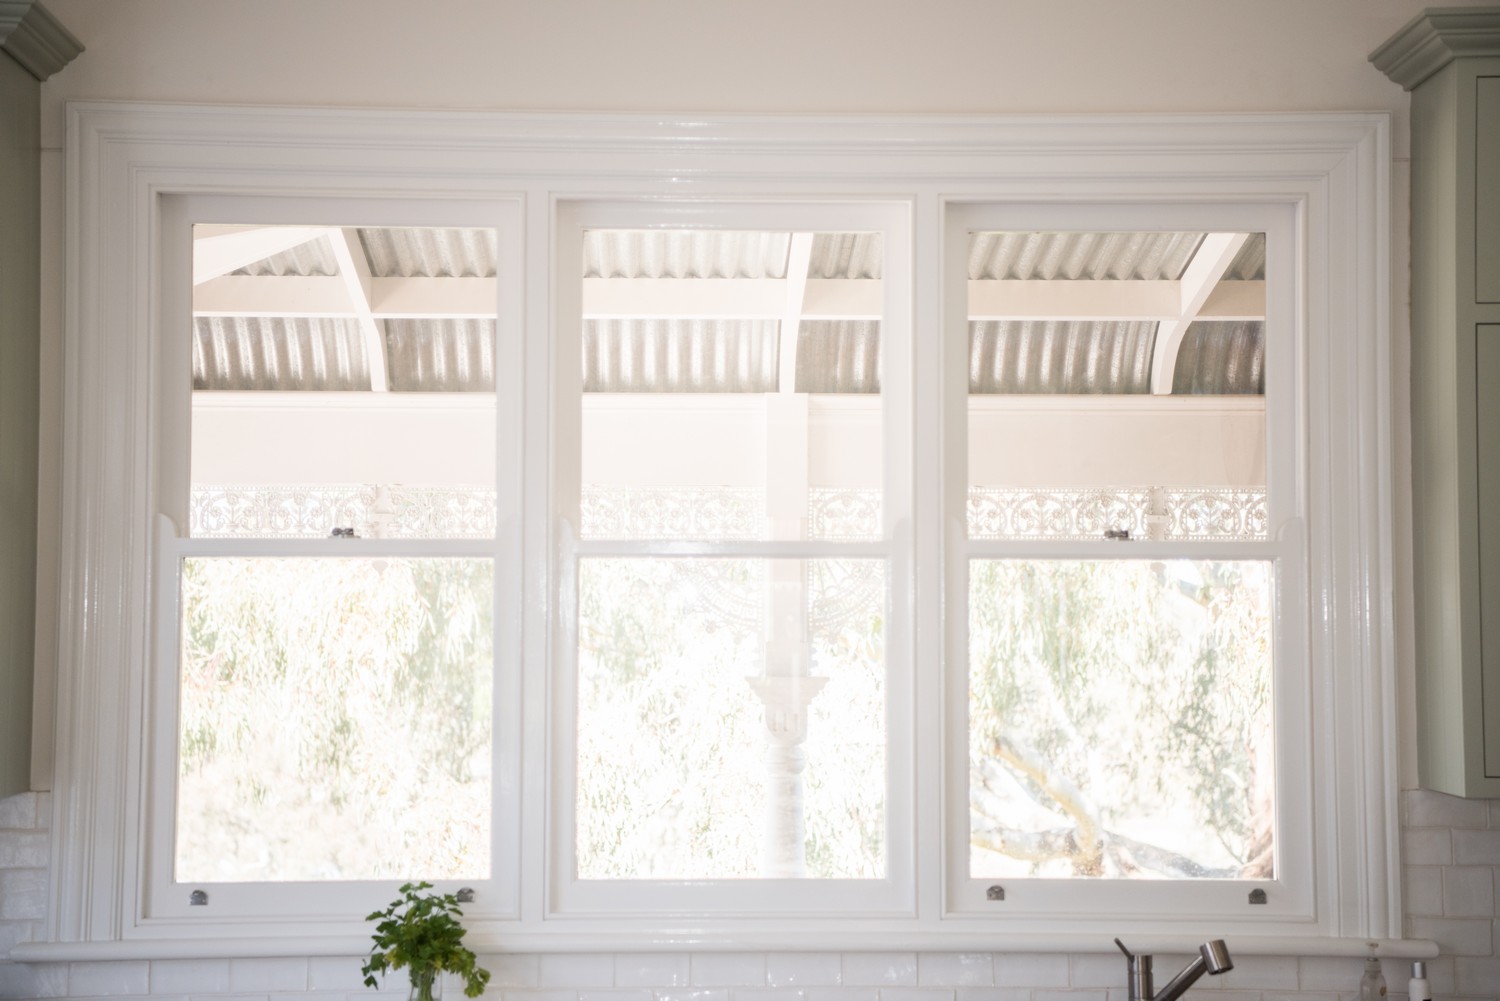 White Double Hung Windows